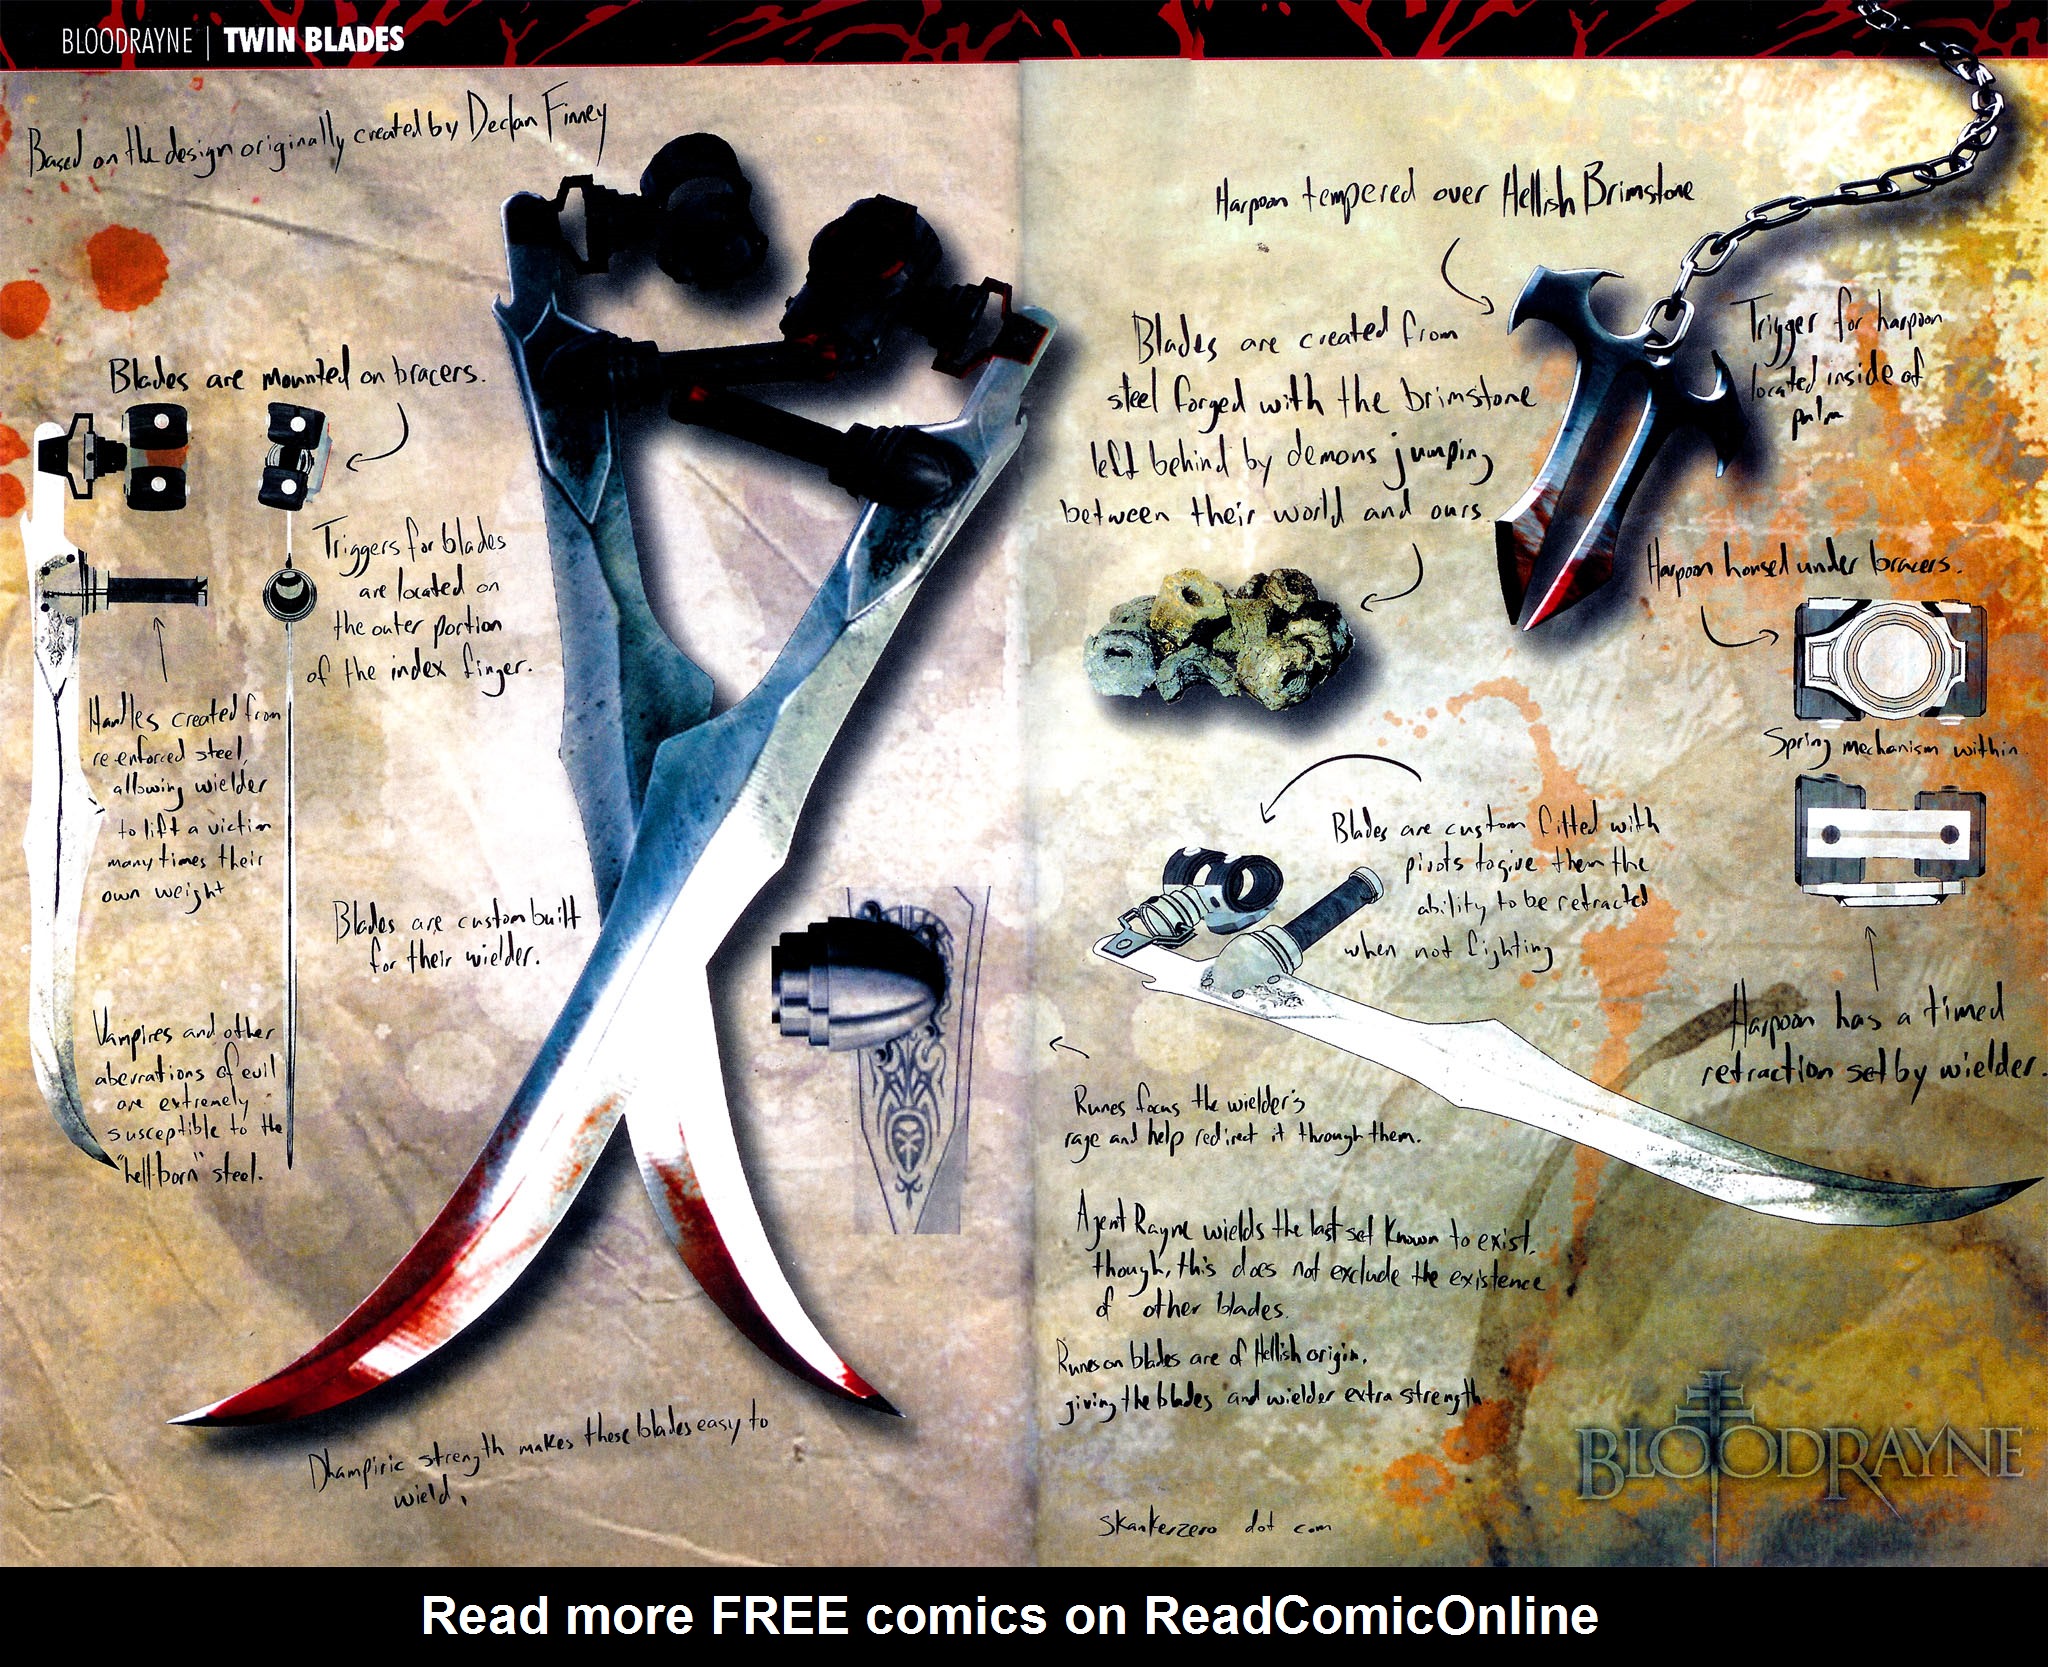 Read online Bloodrayne: Twin Blades comic -  Issue # Full - 31